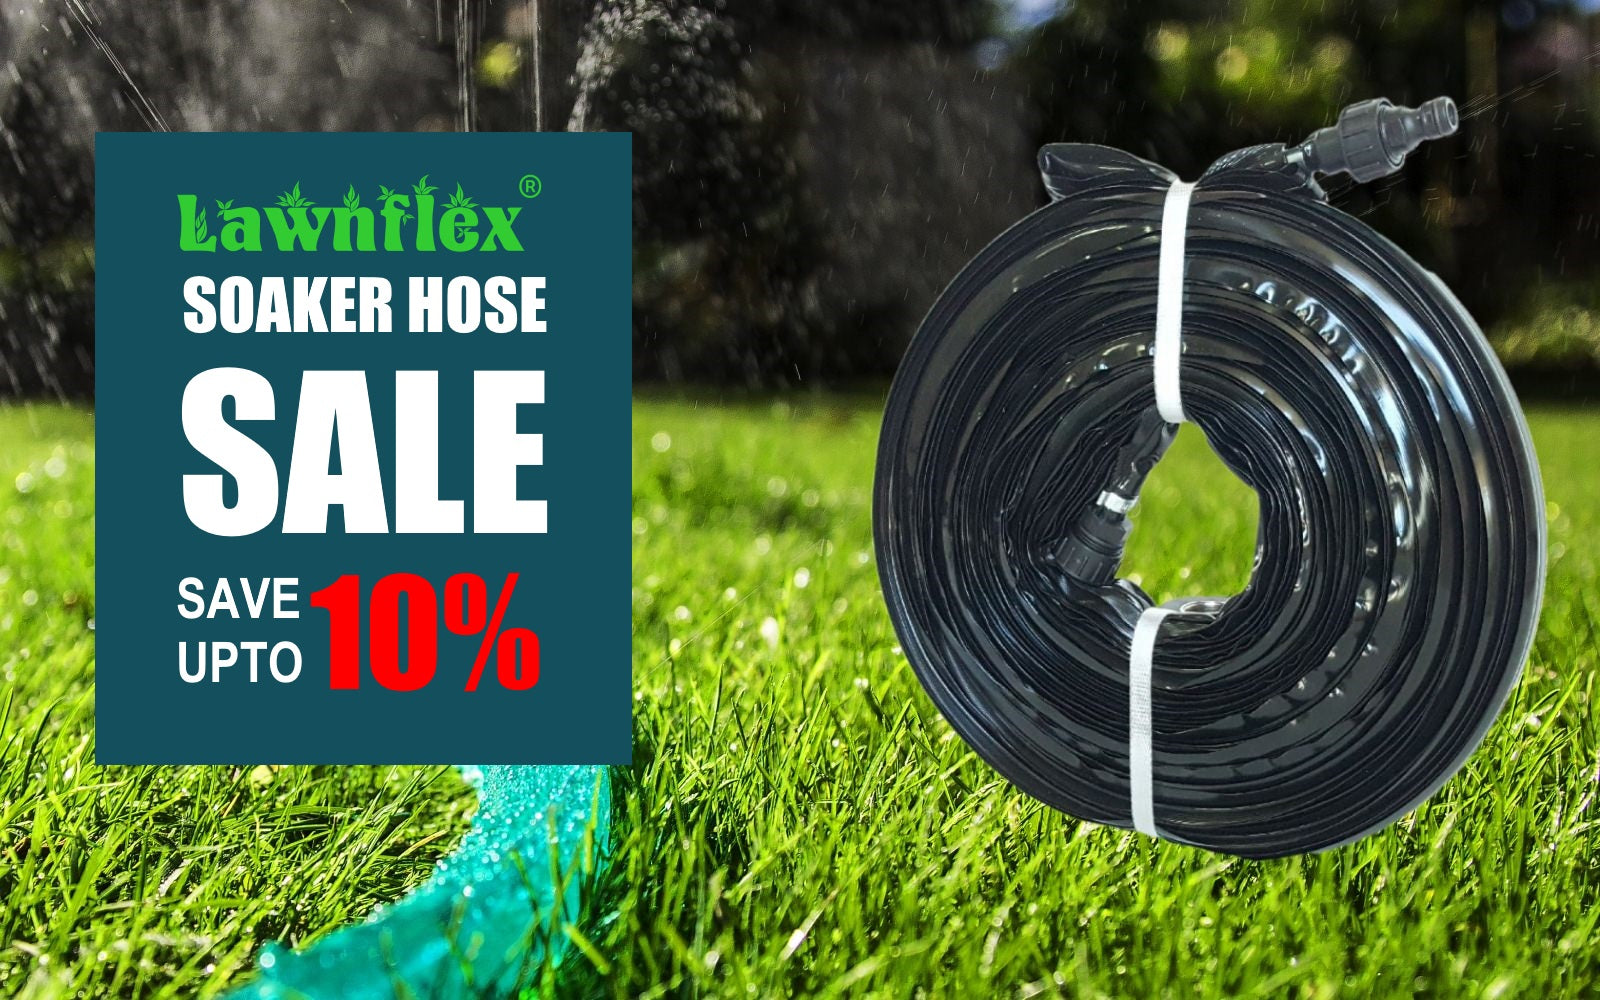 Save 10% on Soaker Hose - Ideal Lawn Sprinkler and Garden Drip Irrigation System Tube